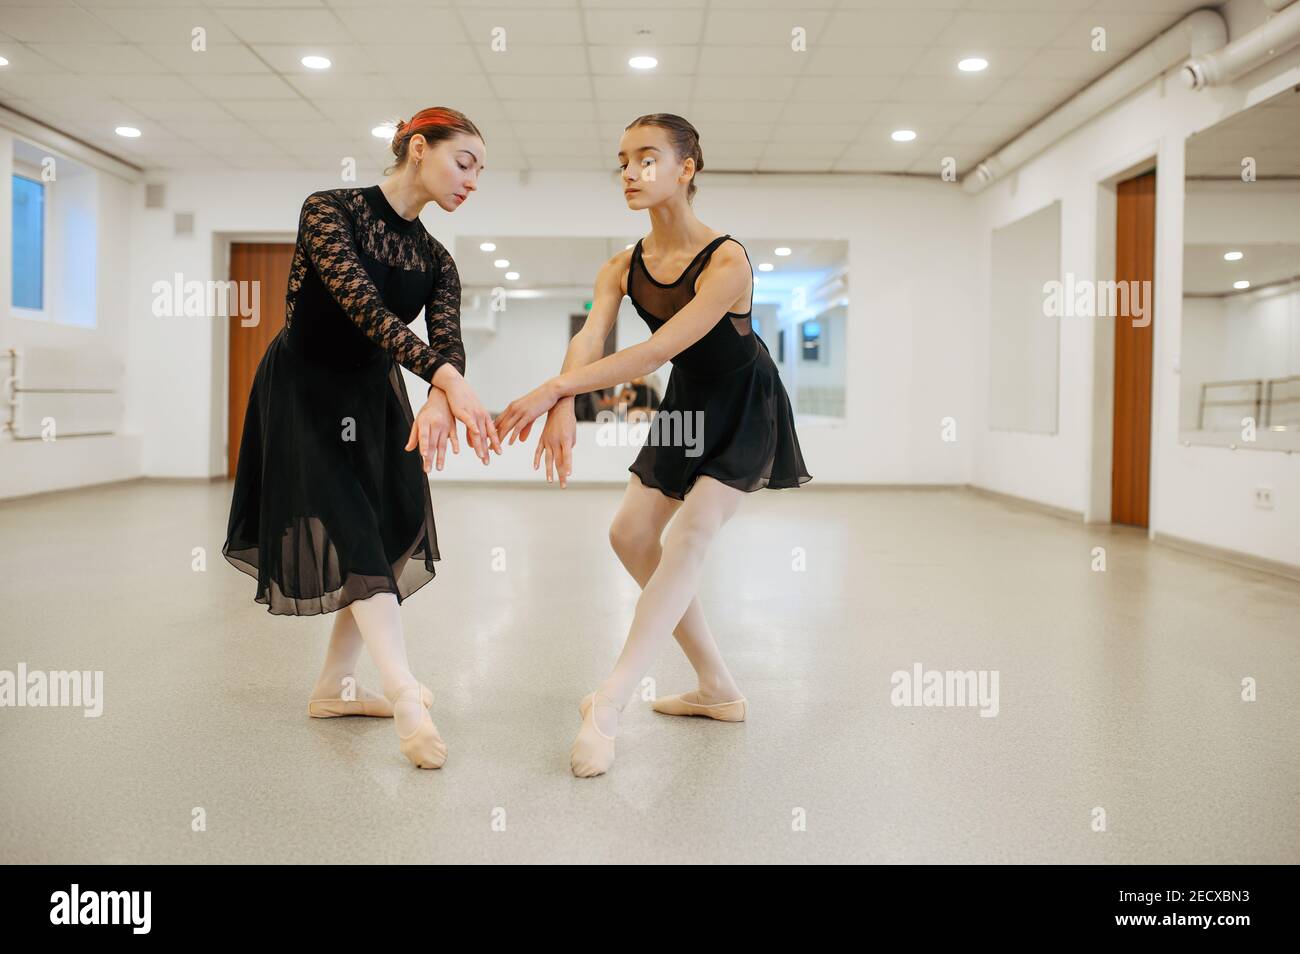 Teacher rehearsing with young ballerina in class Stock Photo